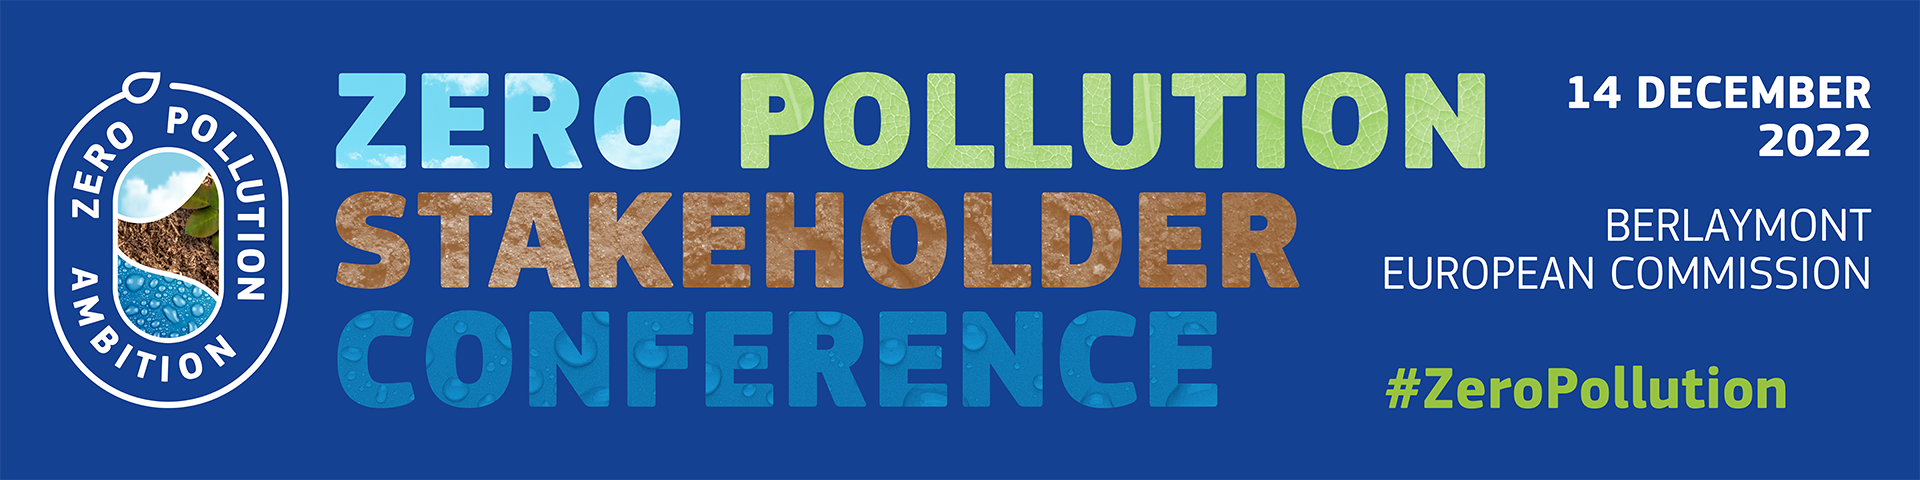 Zero Pollution Stakeholder Conference - 14 December 20222